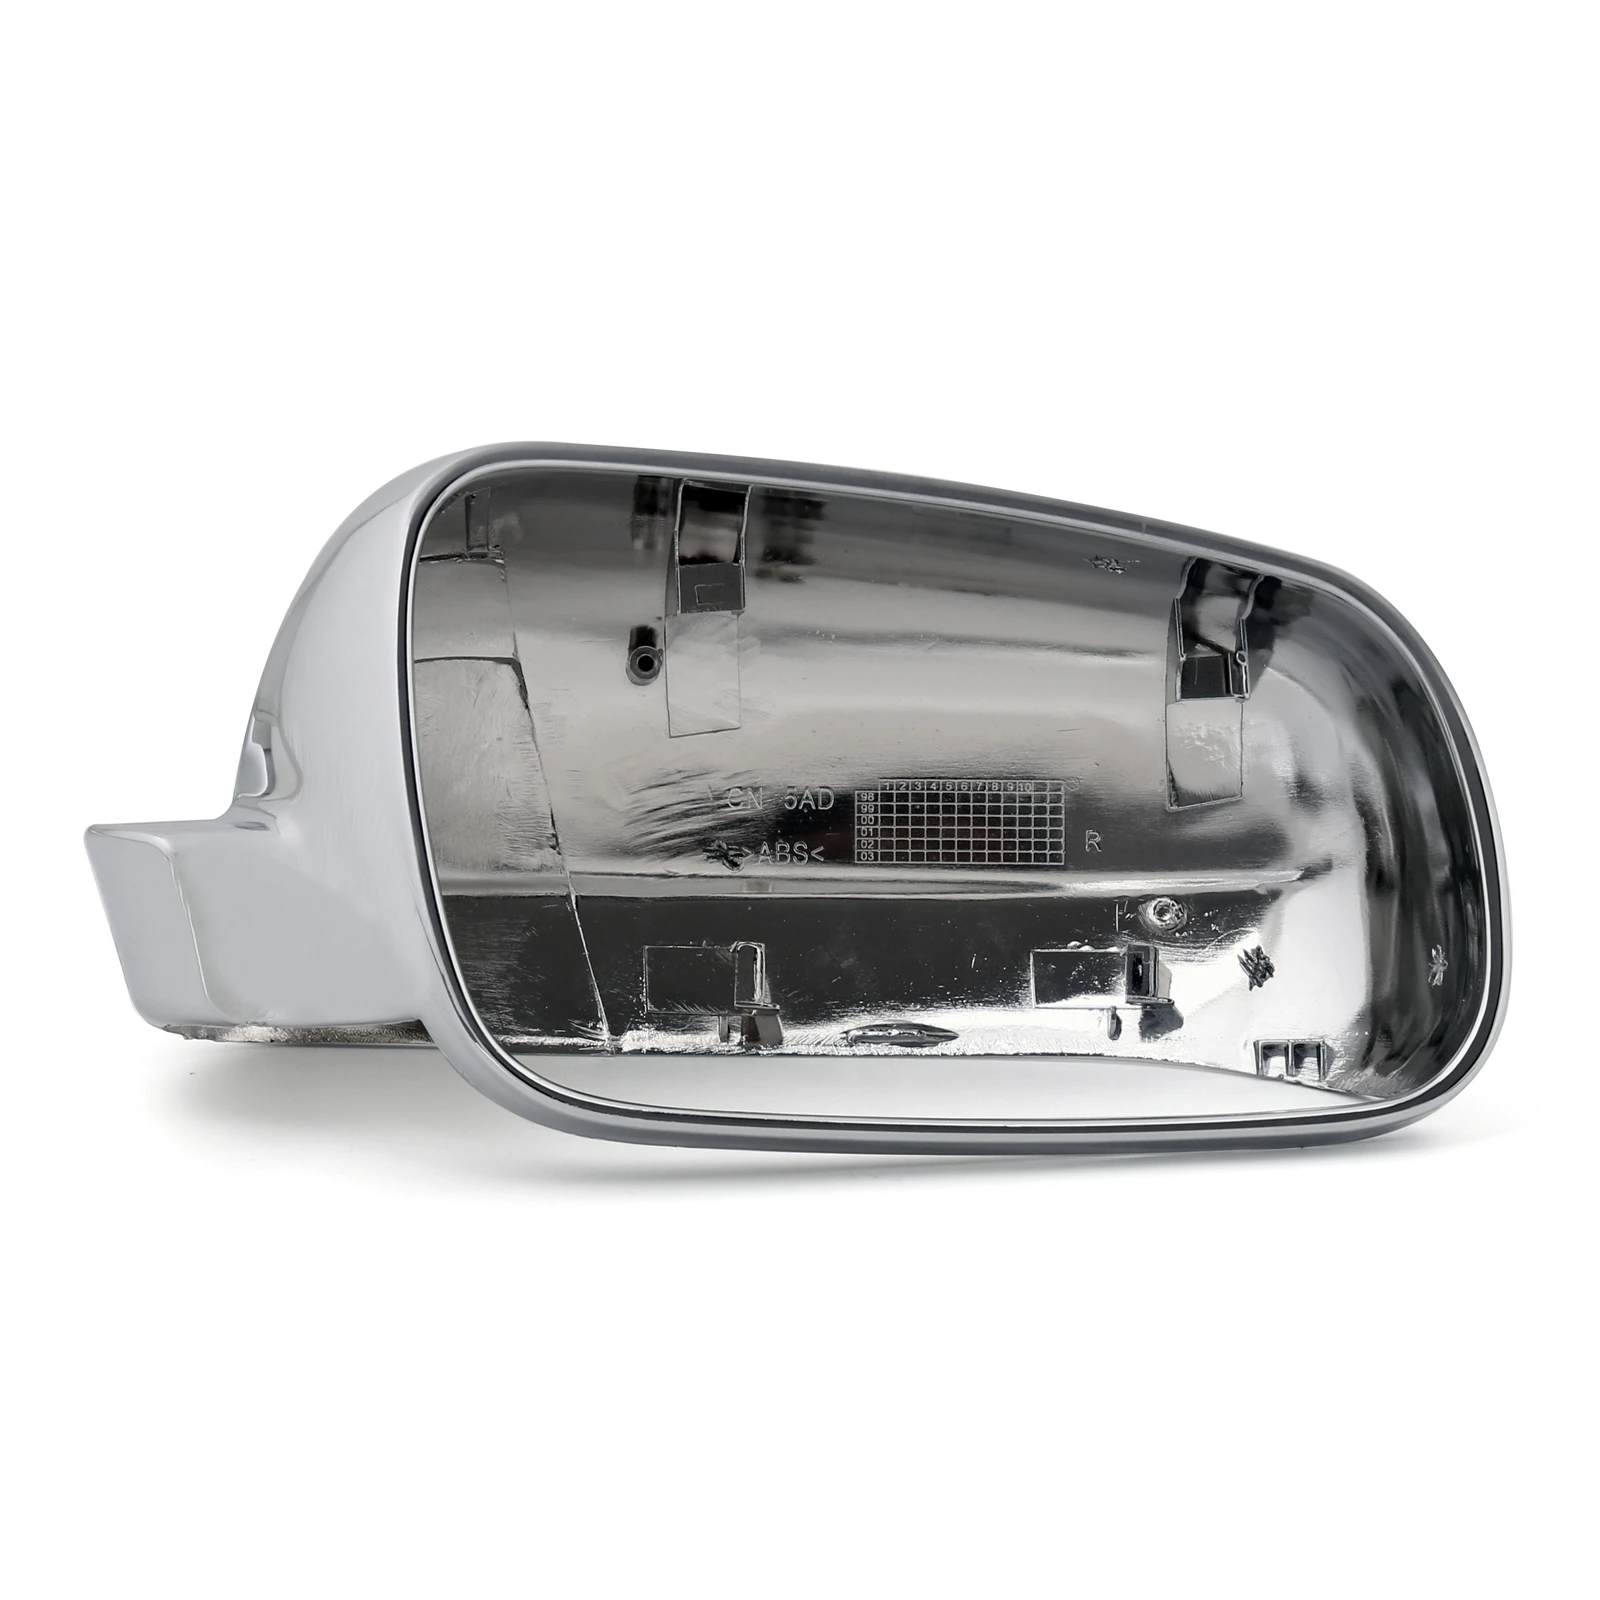 

Areyourshop Right Side Rear View Mirror Cover For VW 1998 1999 2000 2001 2002 2003 2004 Passat Golf Jetta MK4 Chrome, Chorme